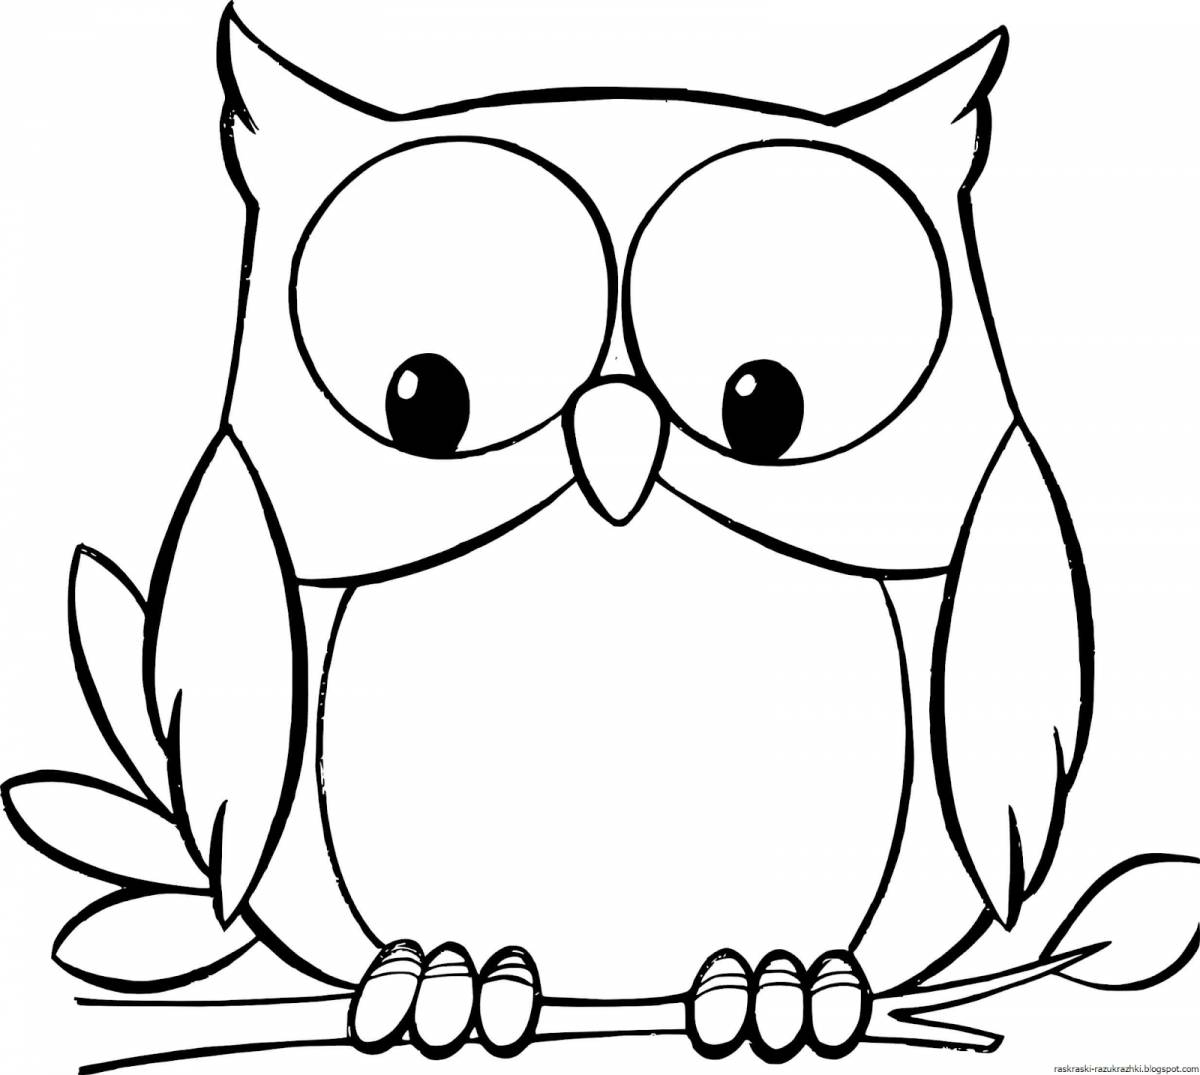 Funny owl coloring for kids